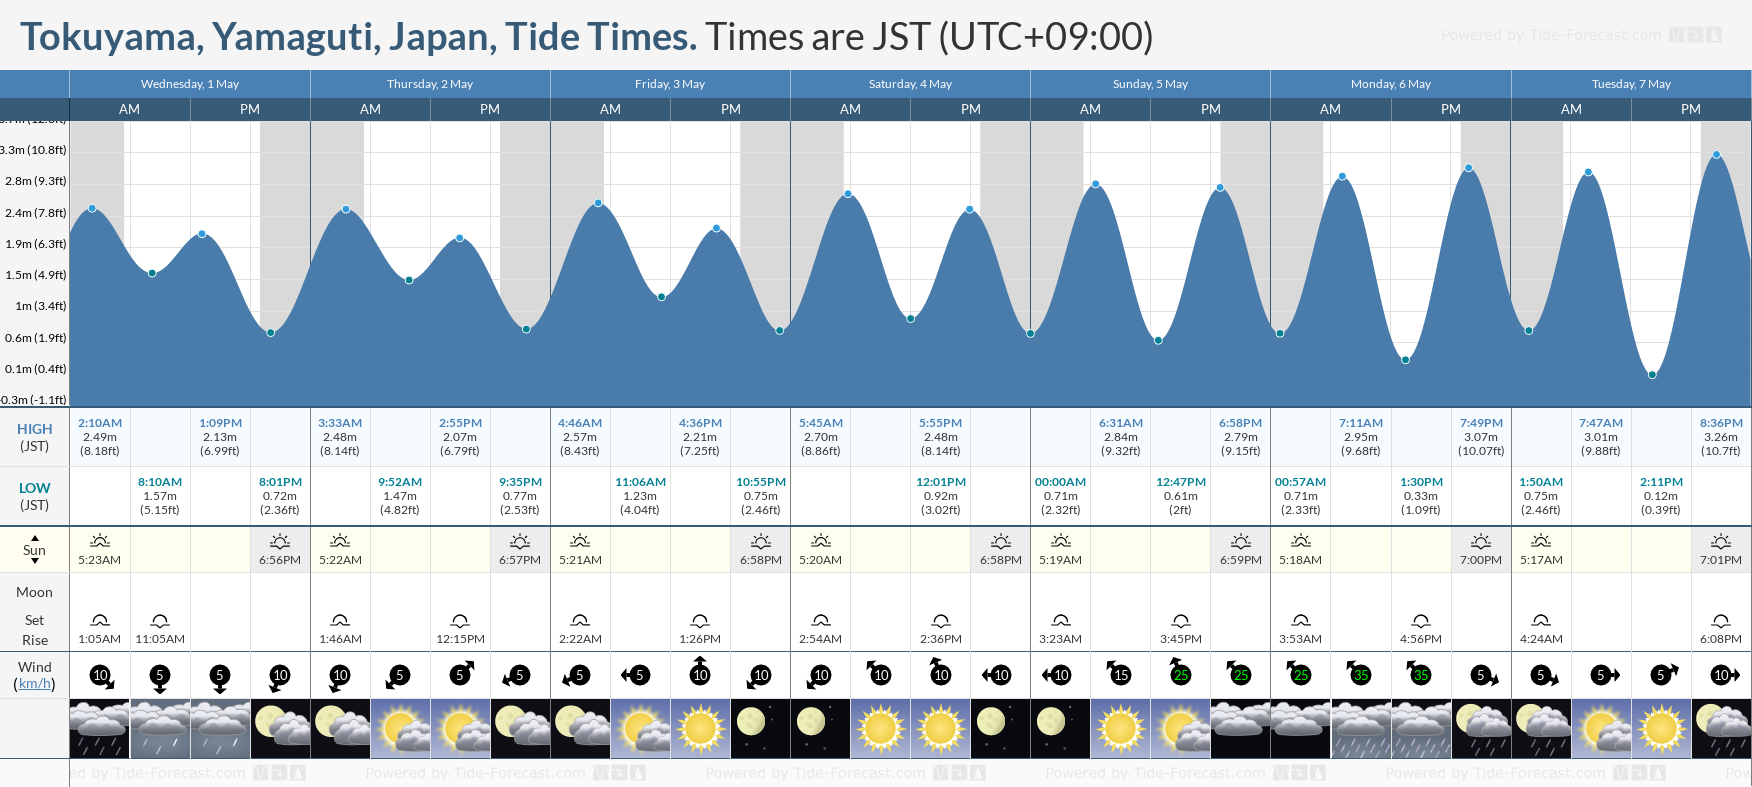 Tokuyama, Yamaguti, Japan Tide Chart including high and low tide tide times for the next 7 days